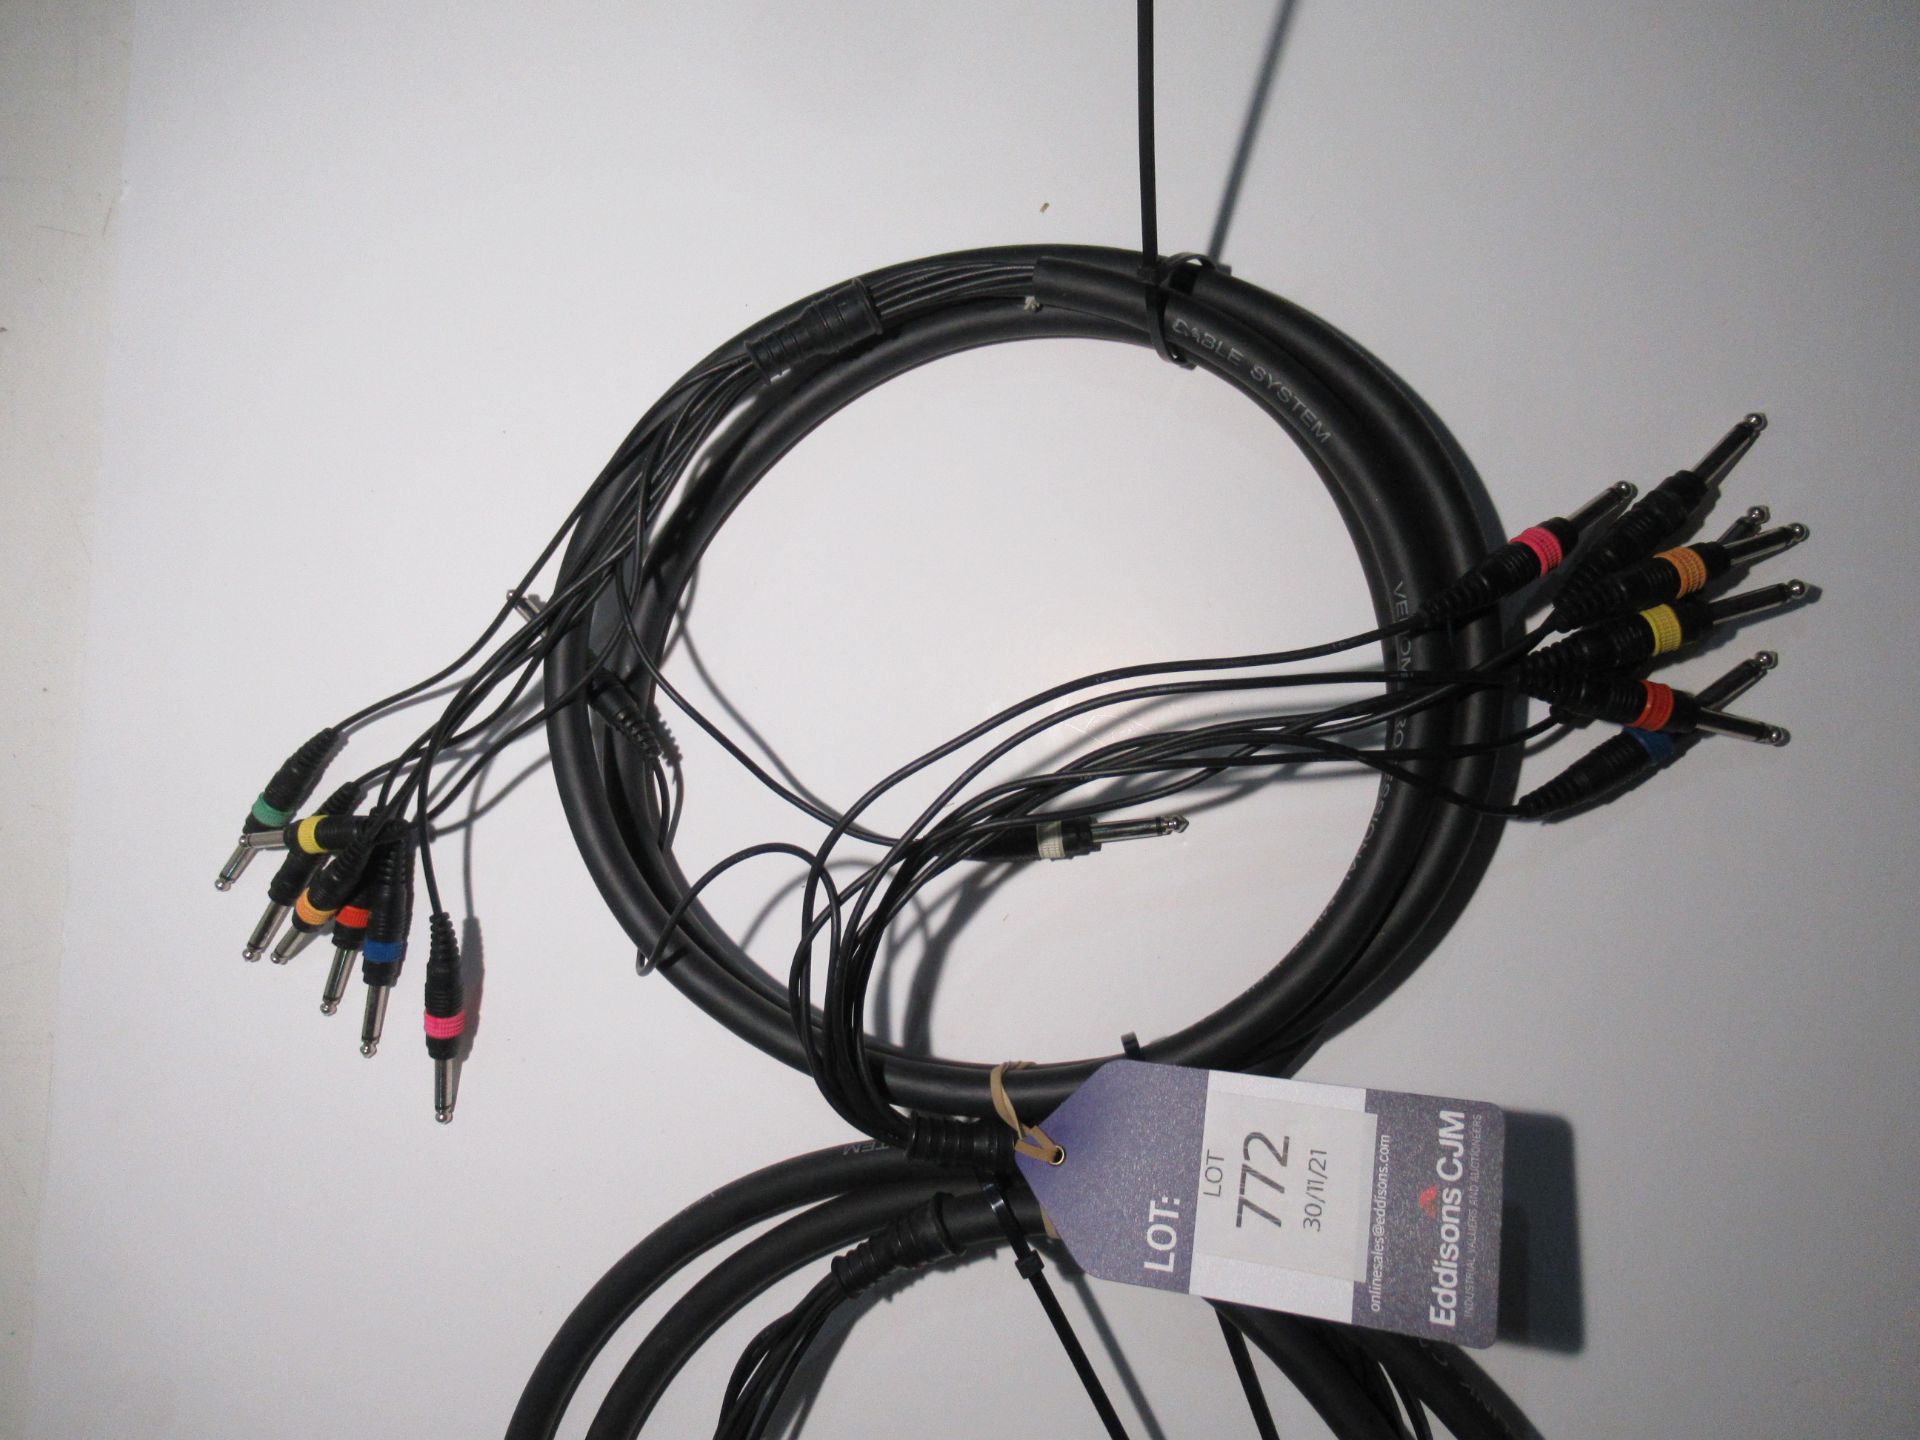 2 x 5m 8Way Snake Mono 6.35mm Jack Cables